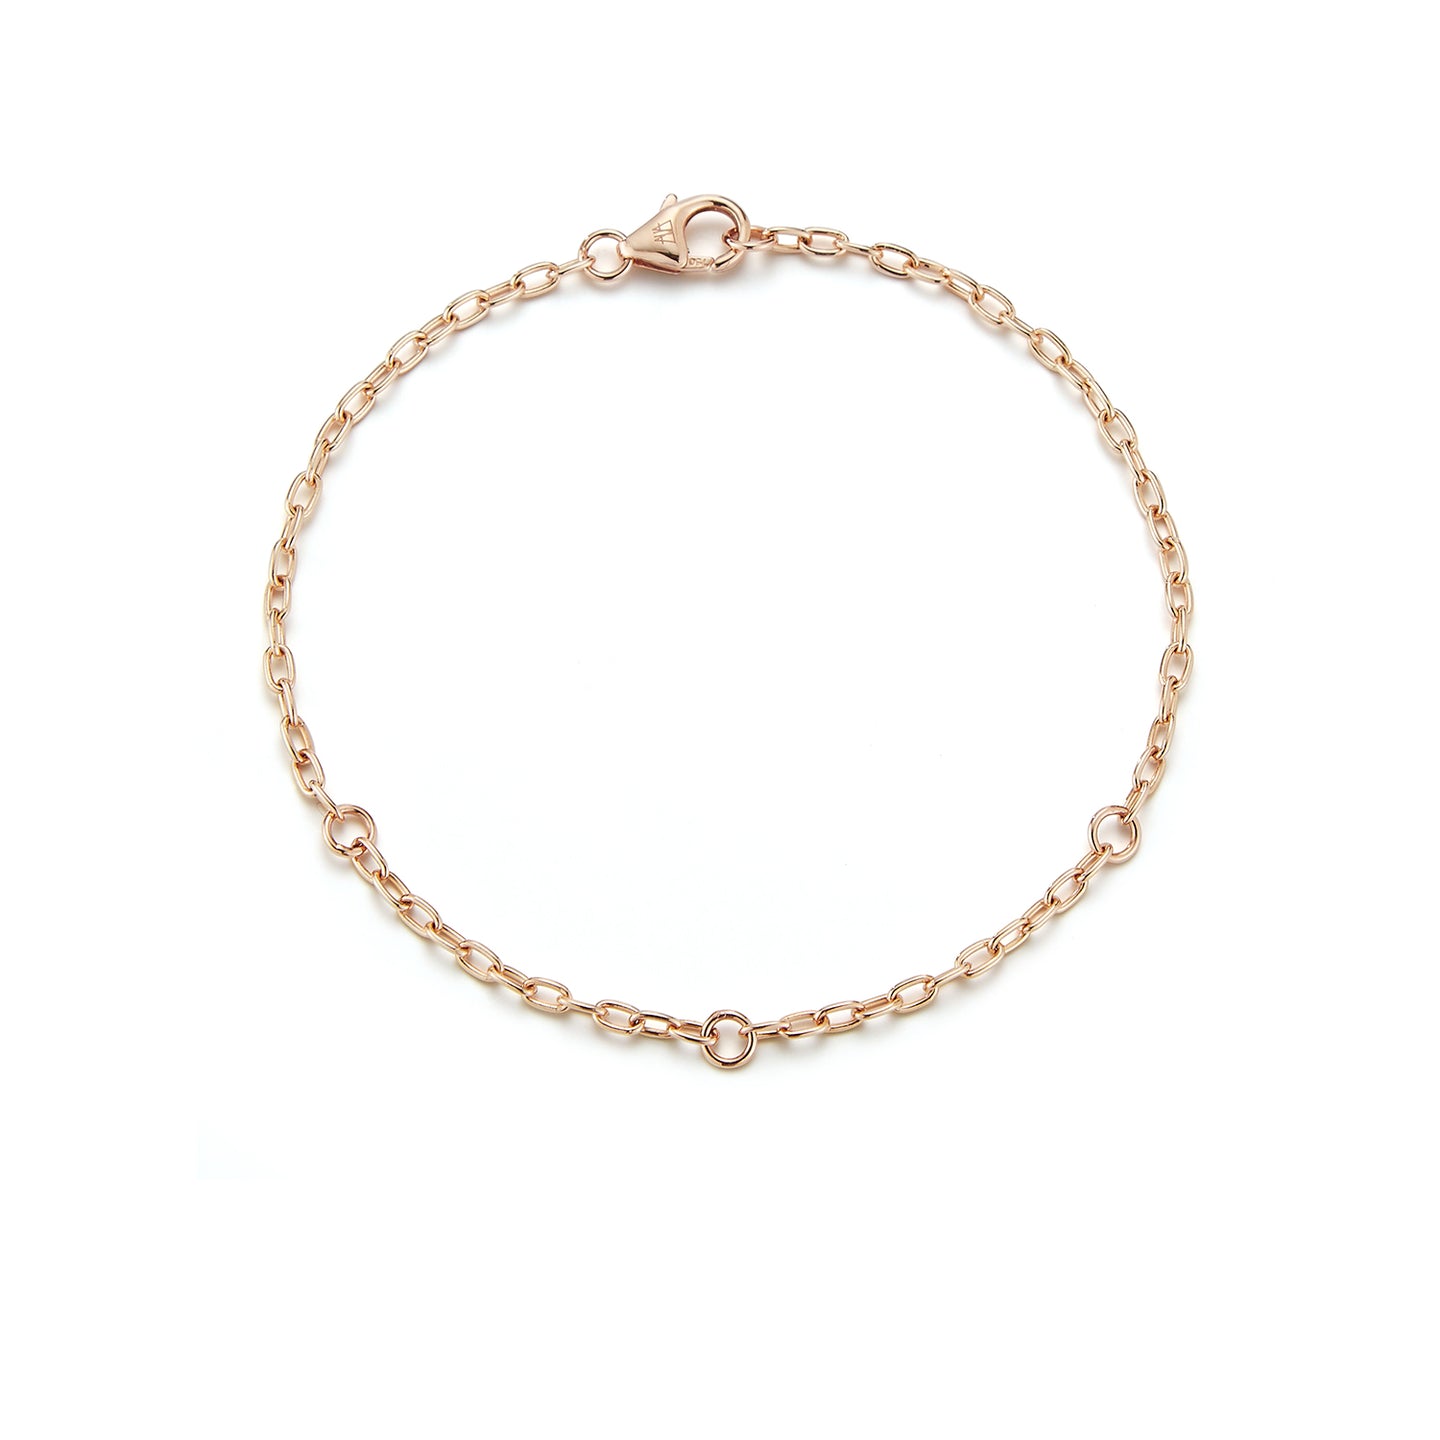 18K GOLD 2.2MM CHAIN WITH THREE LINKS FOR MINI CHARM